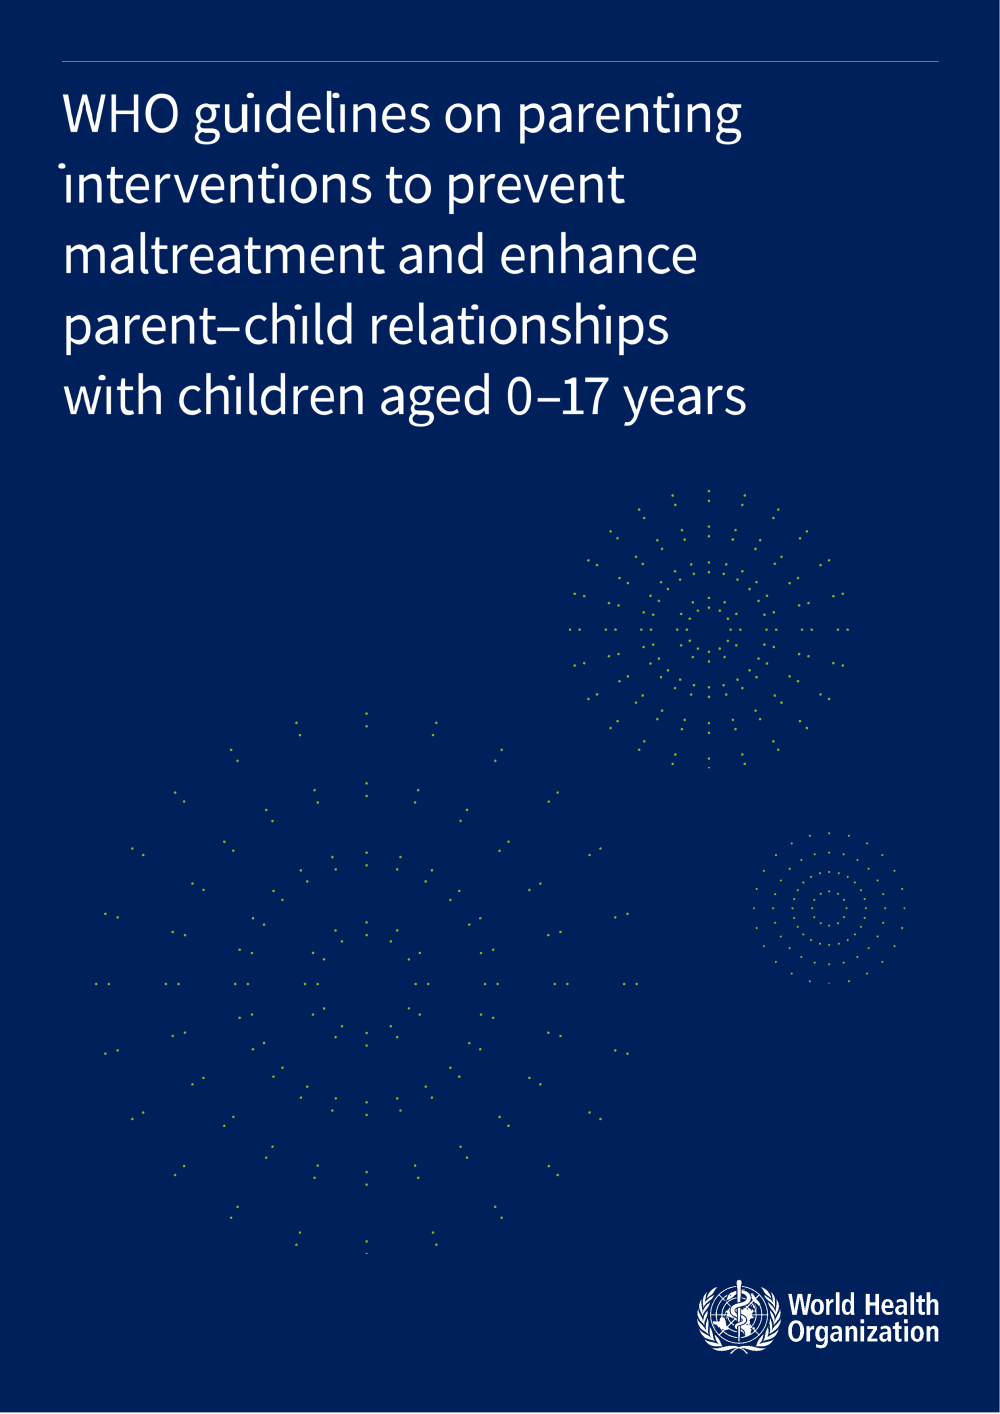 WHO guidelines on parenting interventions to prevent maltreatment